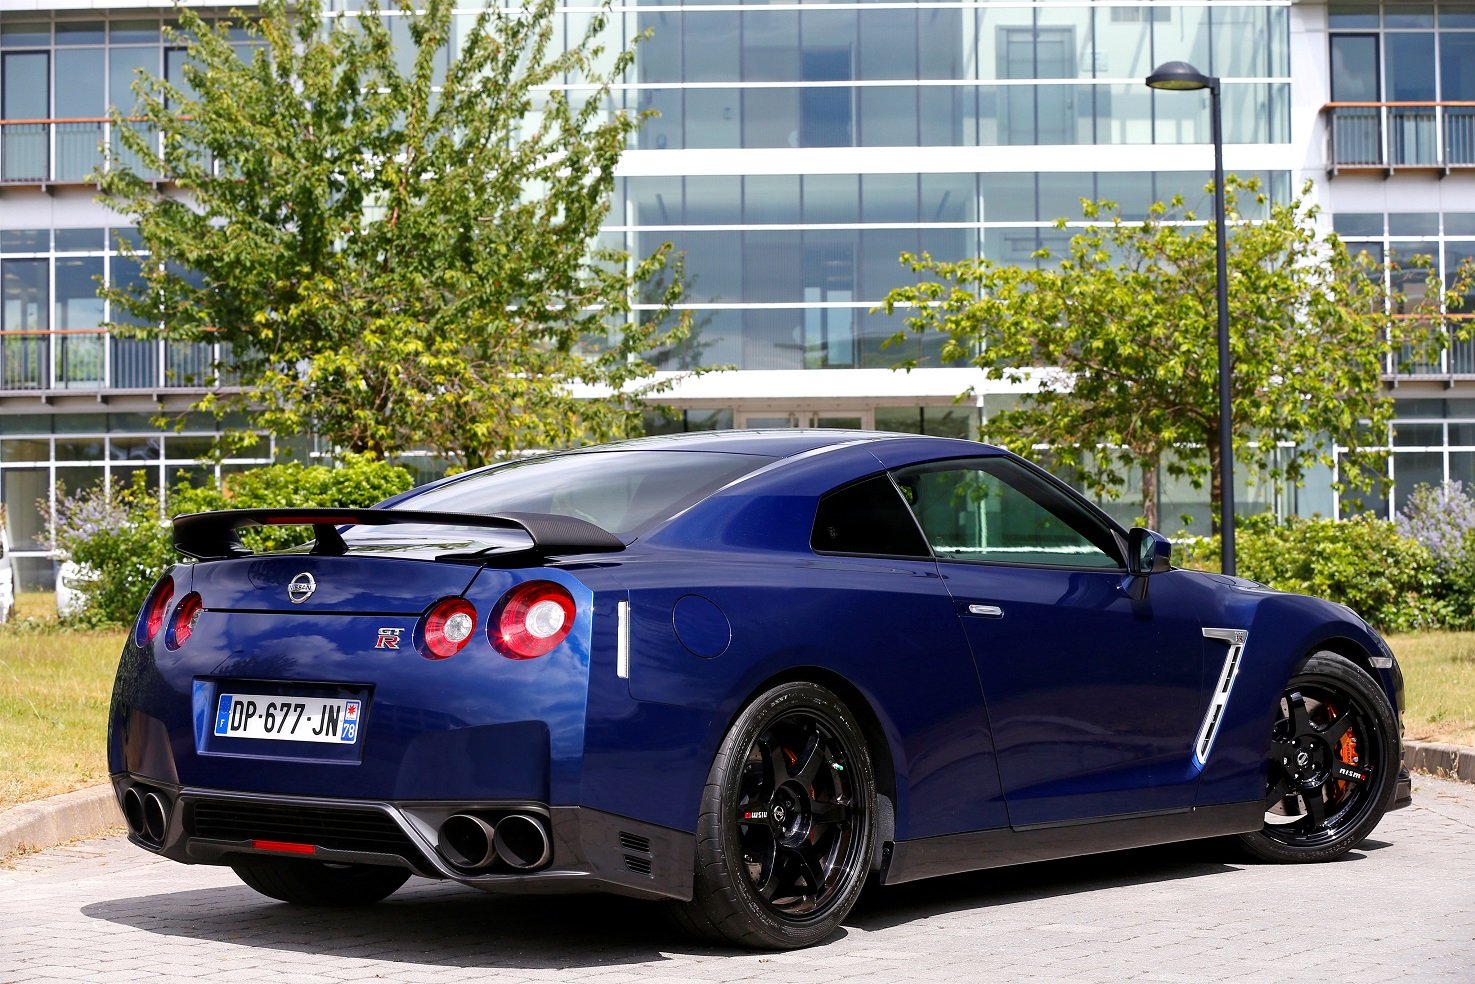 nissan, Gt r, Track, Edition, Cars, Coupe, 2015 Wallpaper